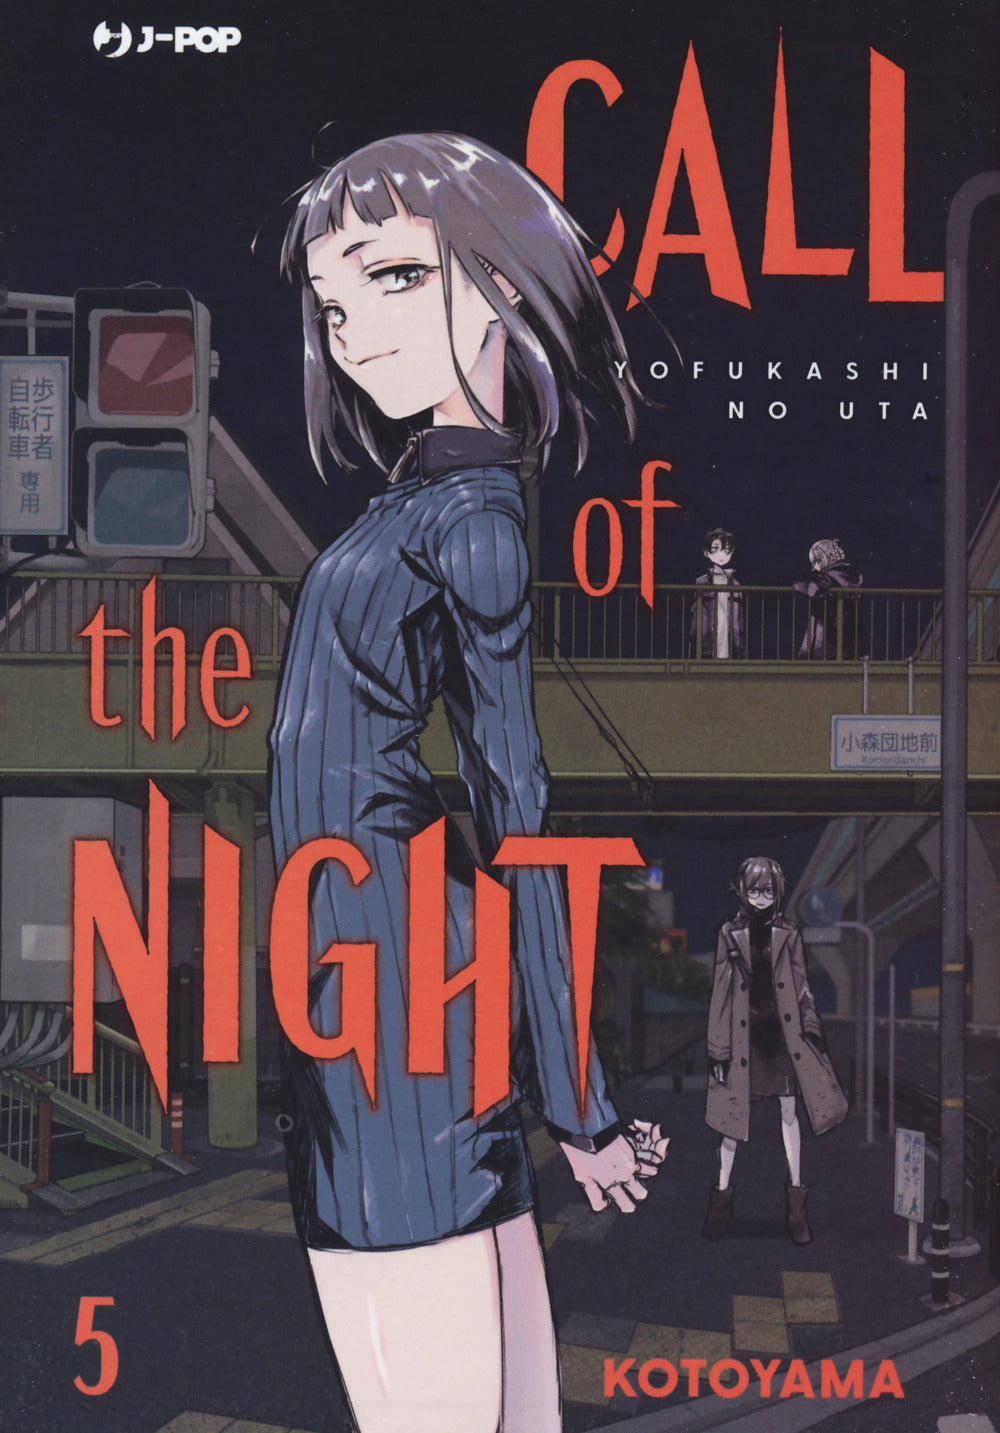 Call of the night. Vol. 5